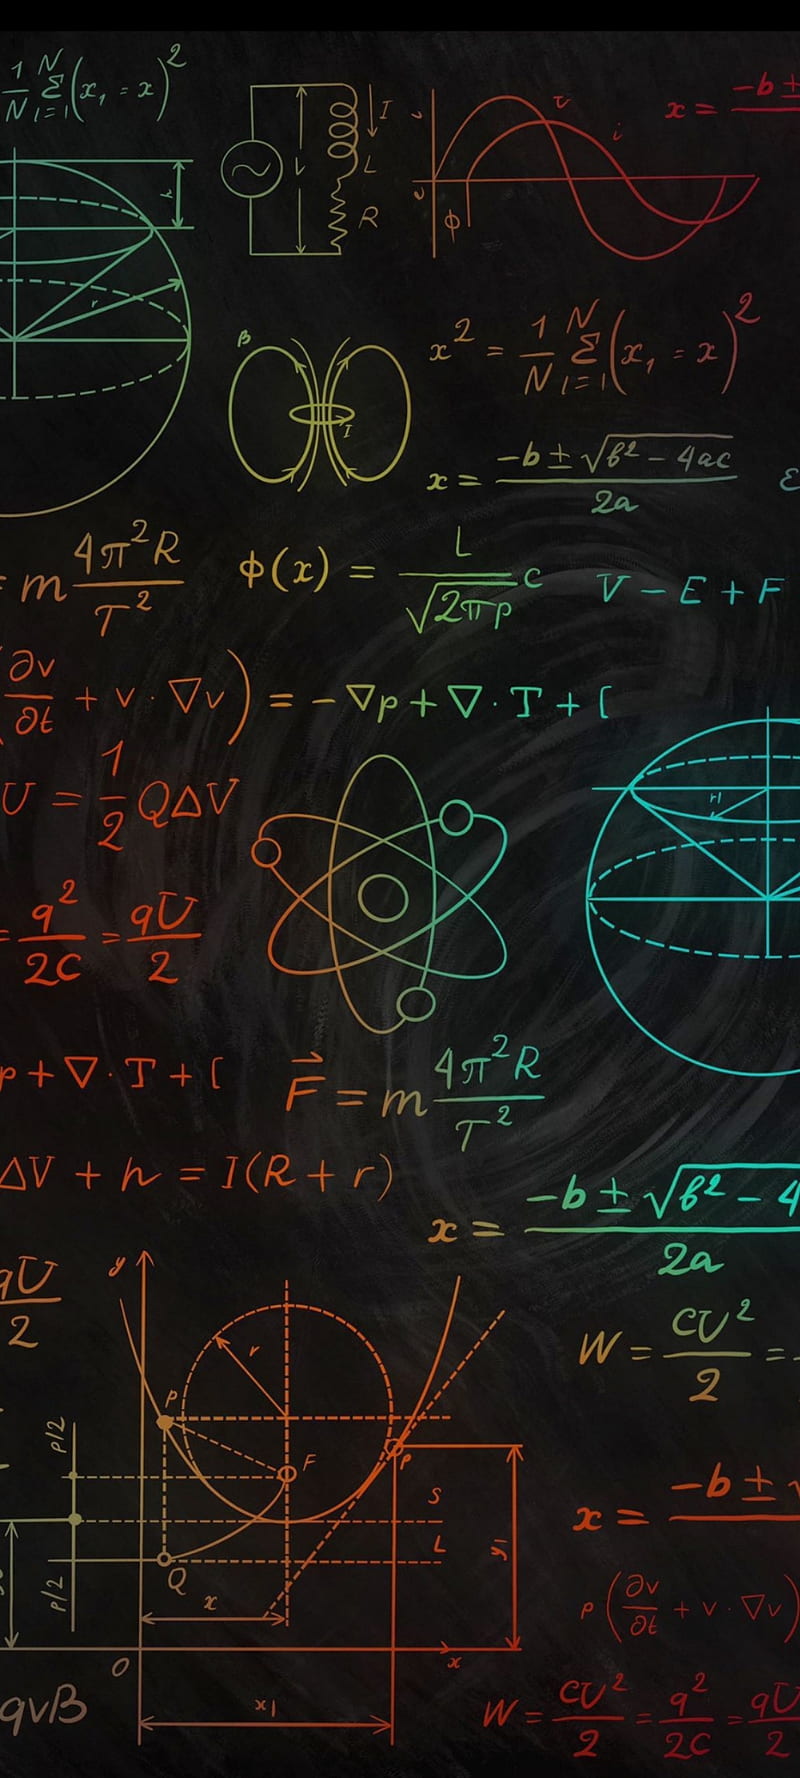 IPhone wallpaper with a blackboard full of mathematical formulas and equations - Math